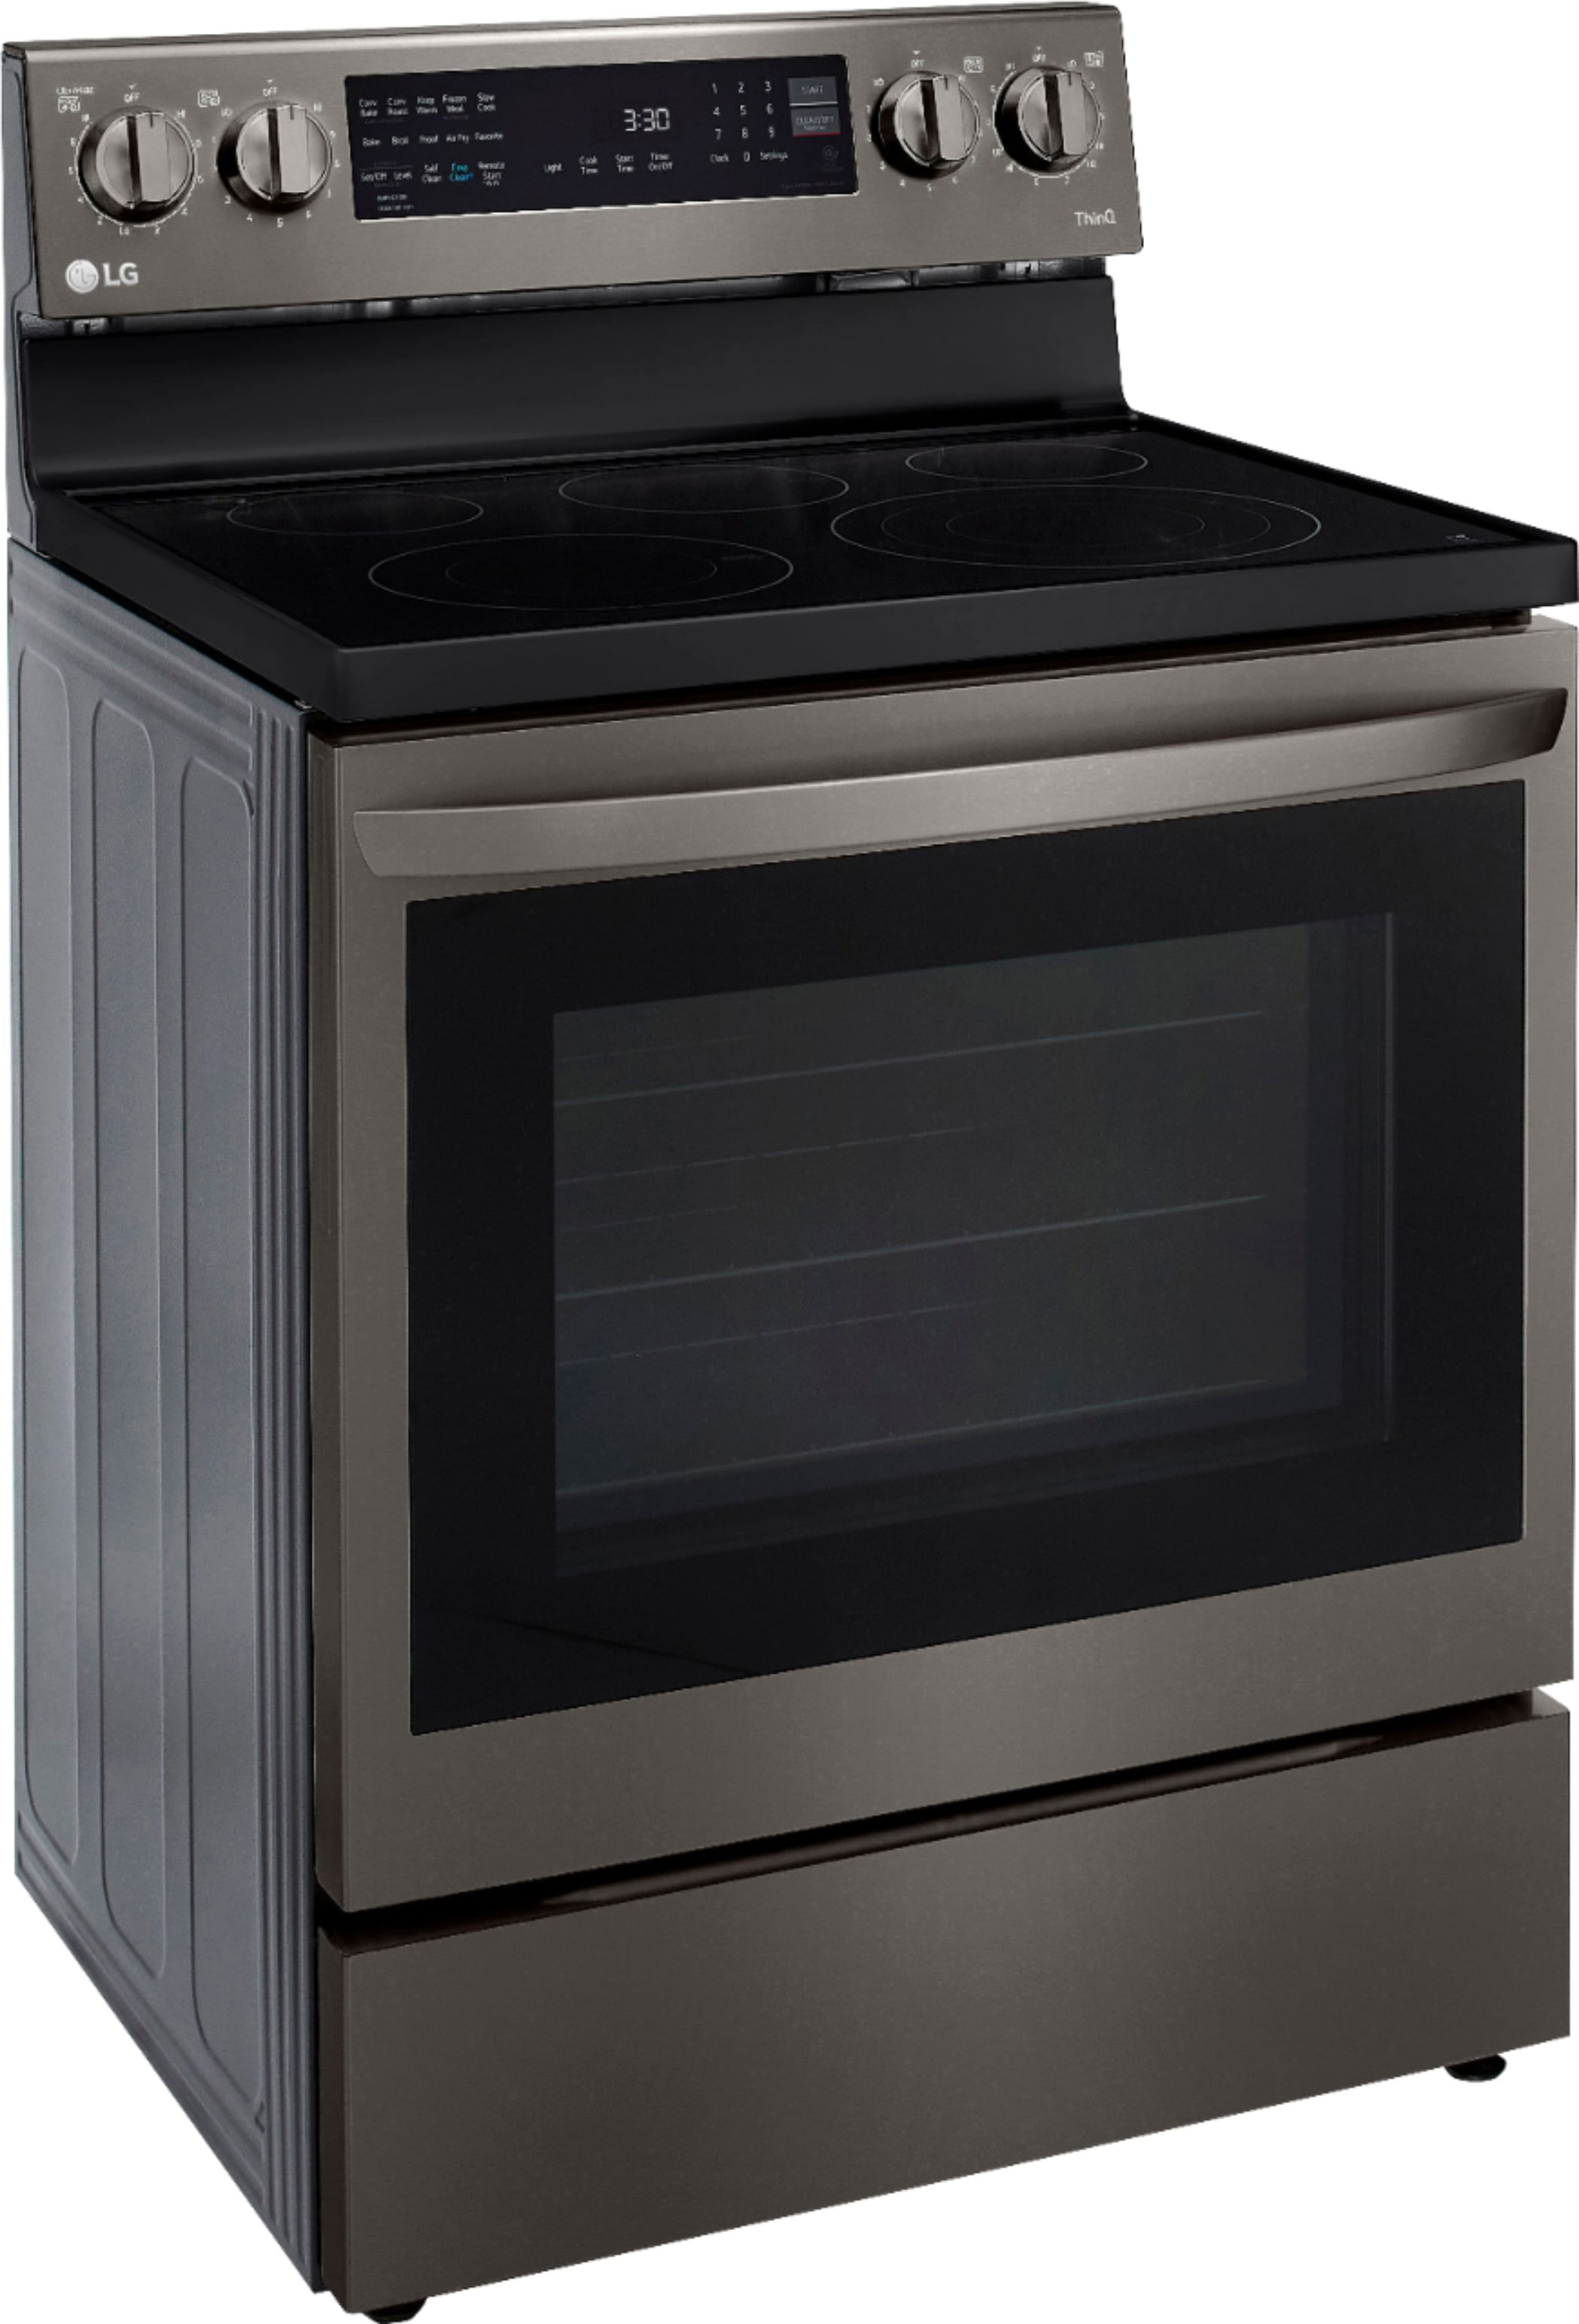 Left View: LG - 6.3 Cu. Ft. Smart Freestanding Electric Convection Range with EasyClean, Air Fry and InstaView - Black stainless steel